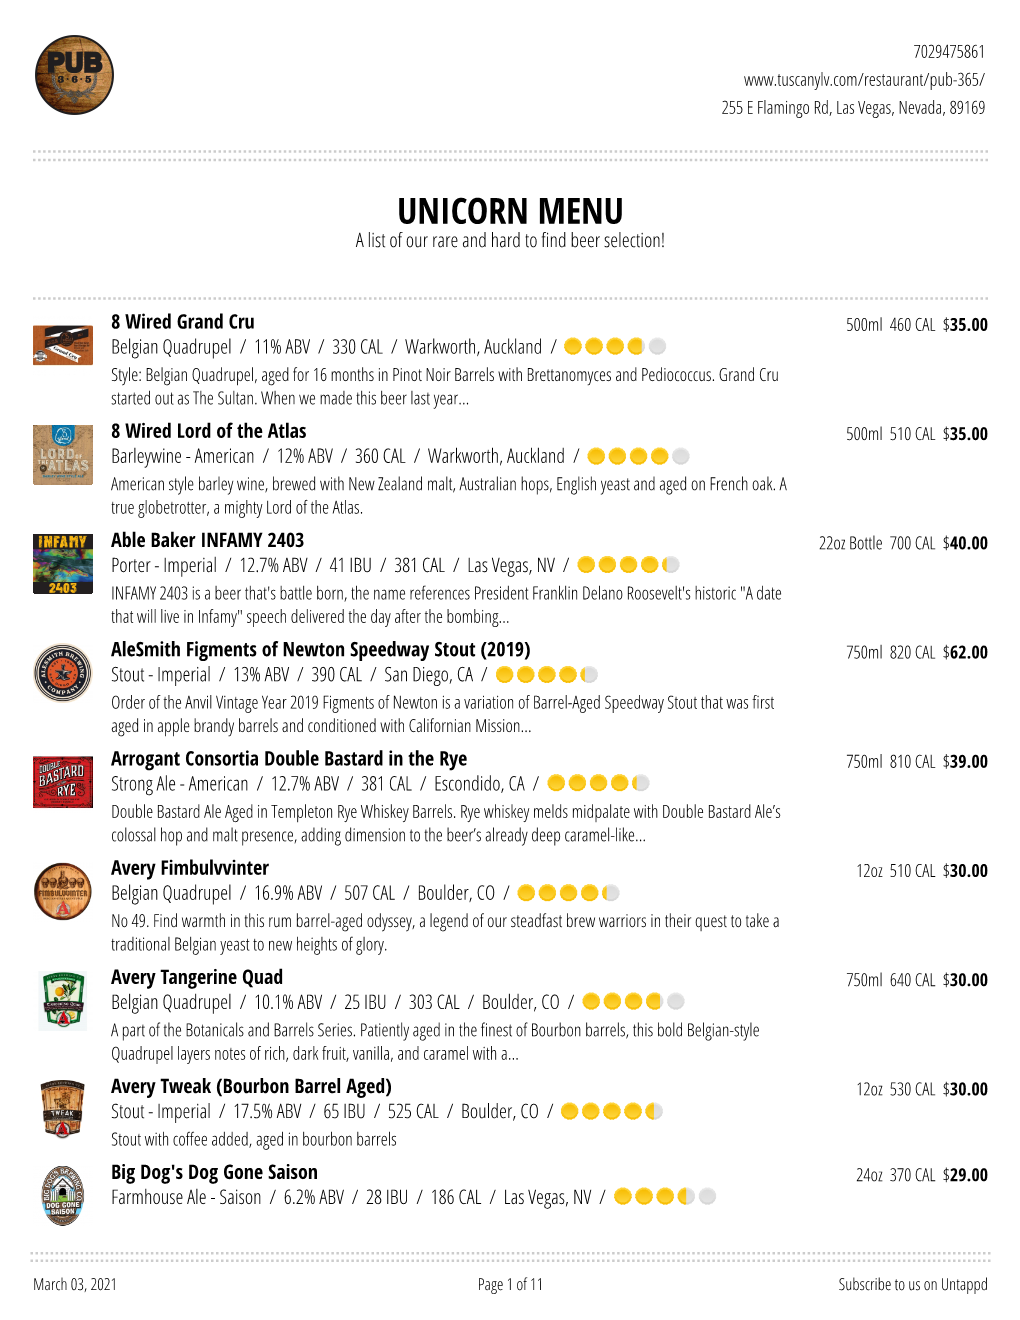 UNICORN MENU a List of Our Rare and Hard to Find Beer Selection!